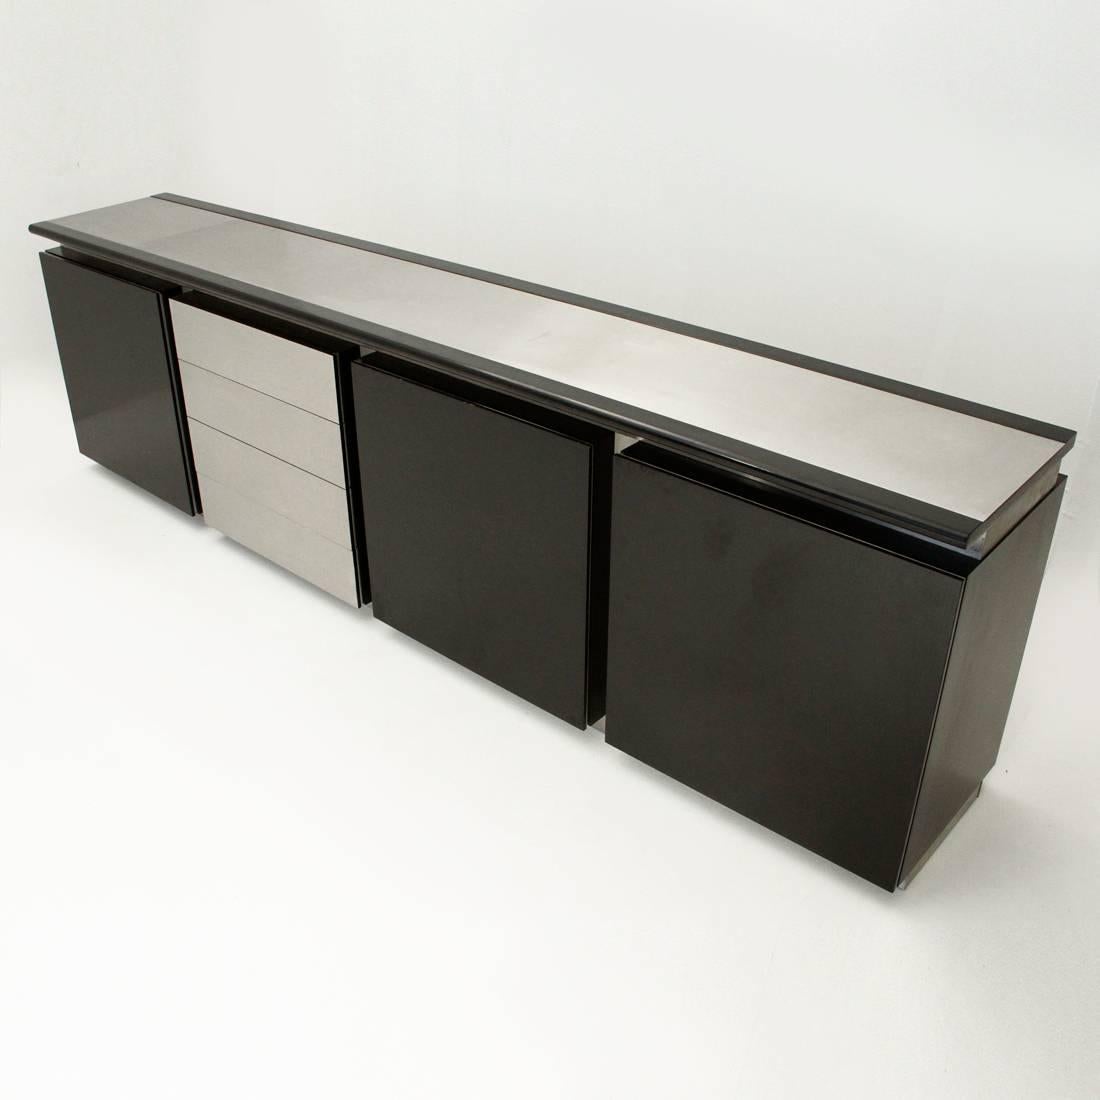 Sideboard designed in 1977 by Lodovico Acerbis and Giotto Stoppino and produced by Acerbis.
Black painted wood structure with brushed metal panels.
Formed by three elements, with leaf opening and glass shelf.
Four-drawer element
Dimensions: